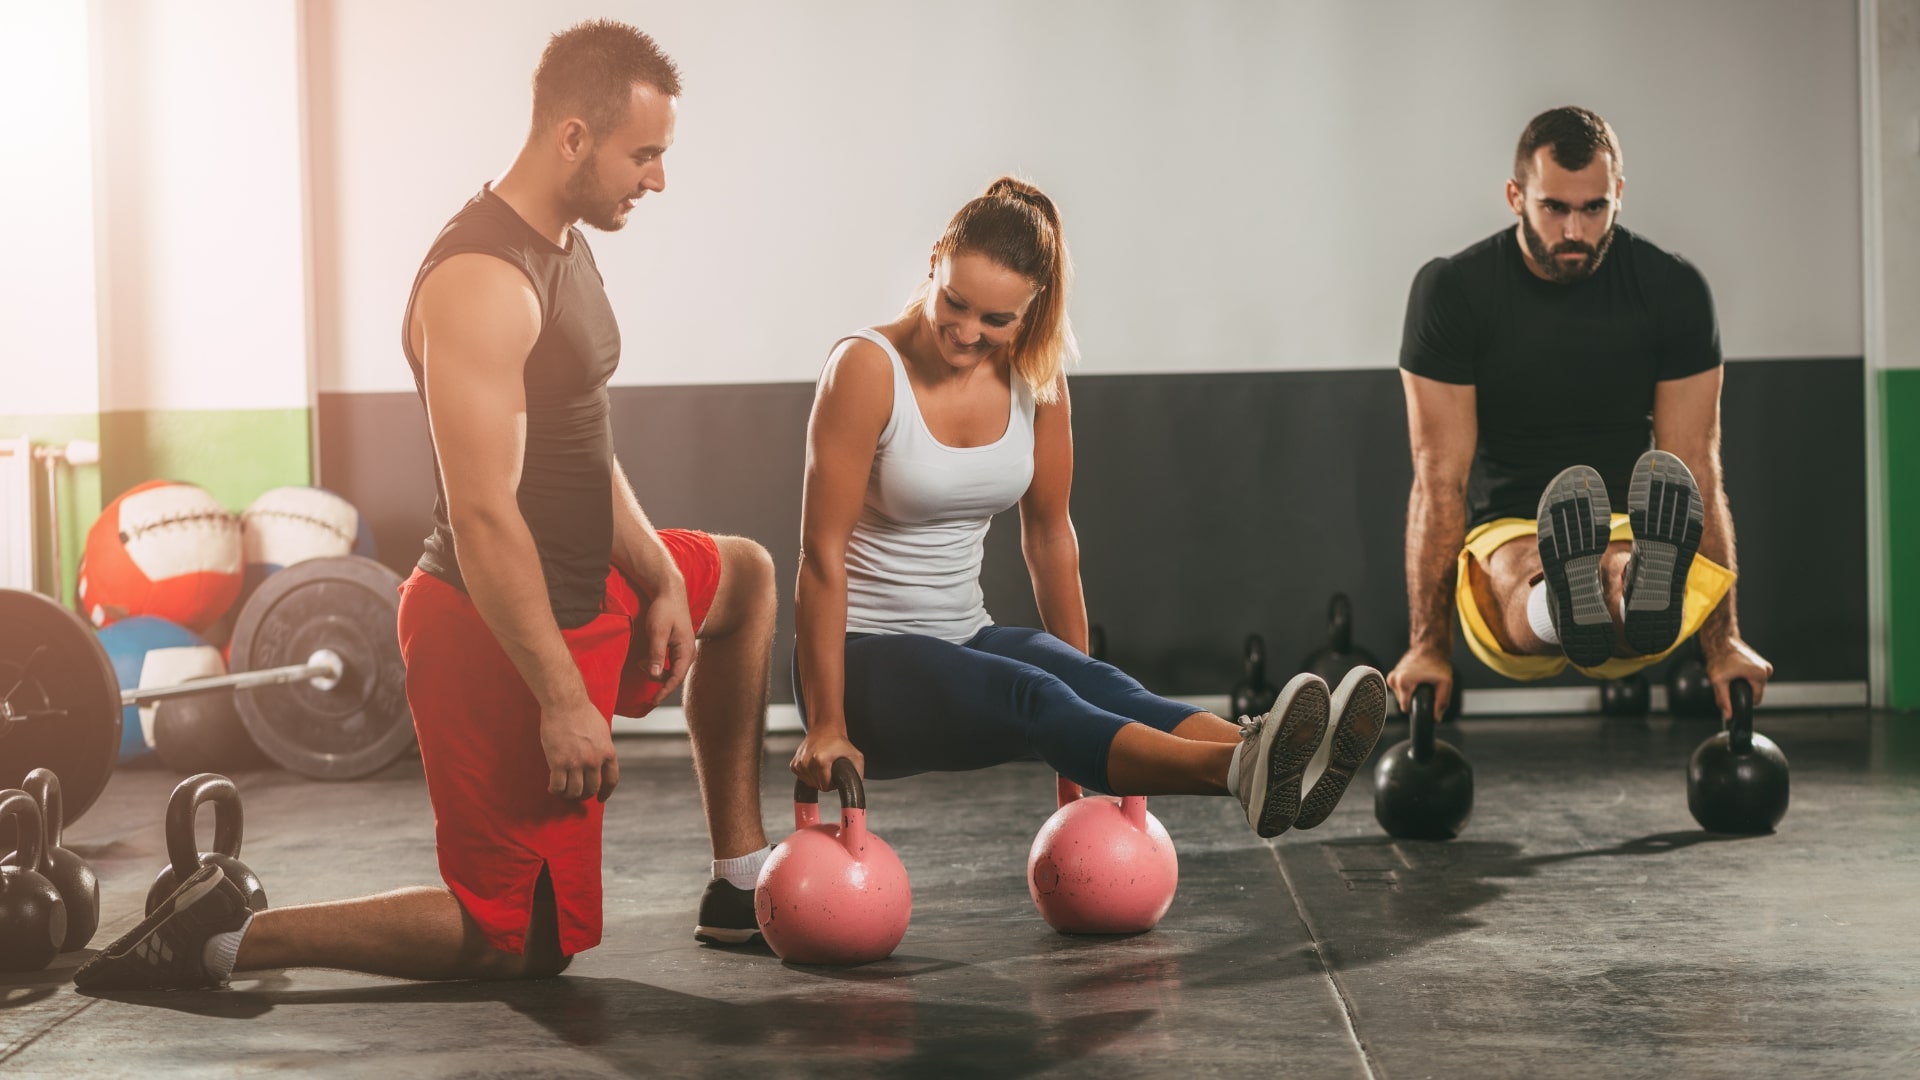 What Makes A Good Personal Trainer